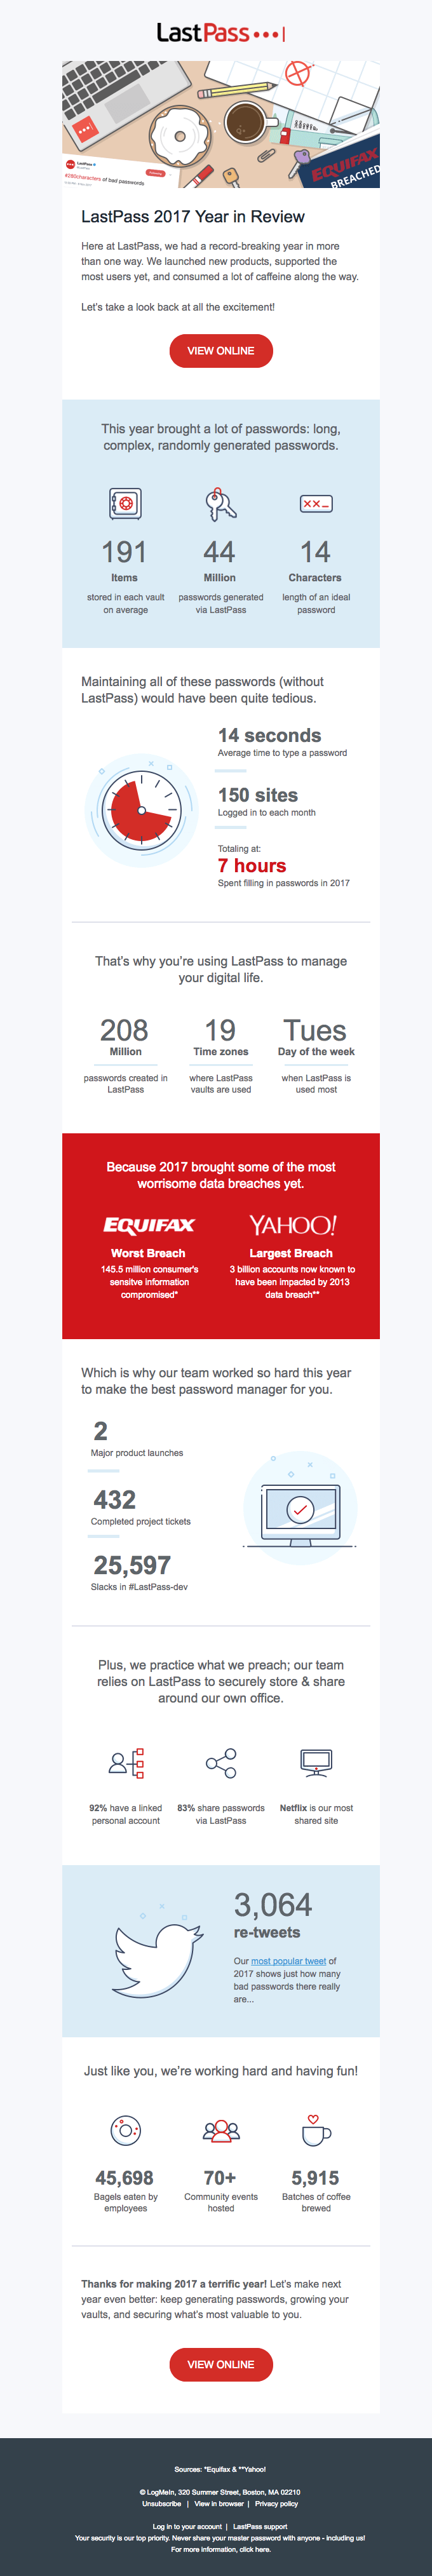 lastpass-2017-year-in-review-email